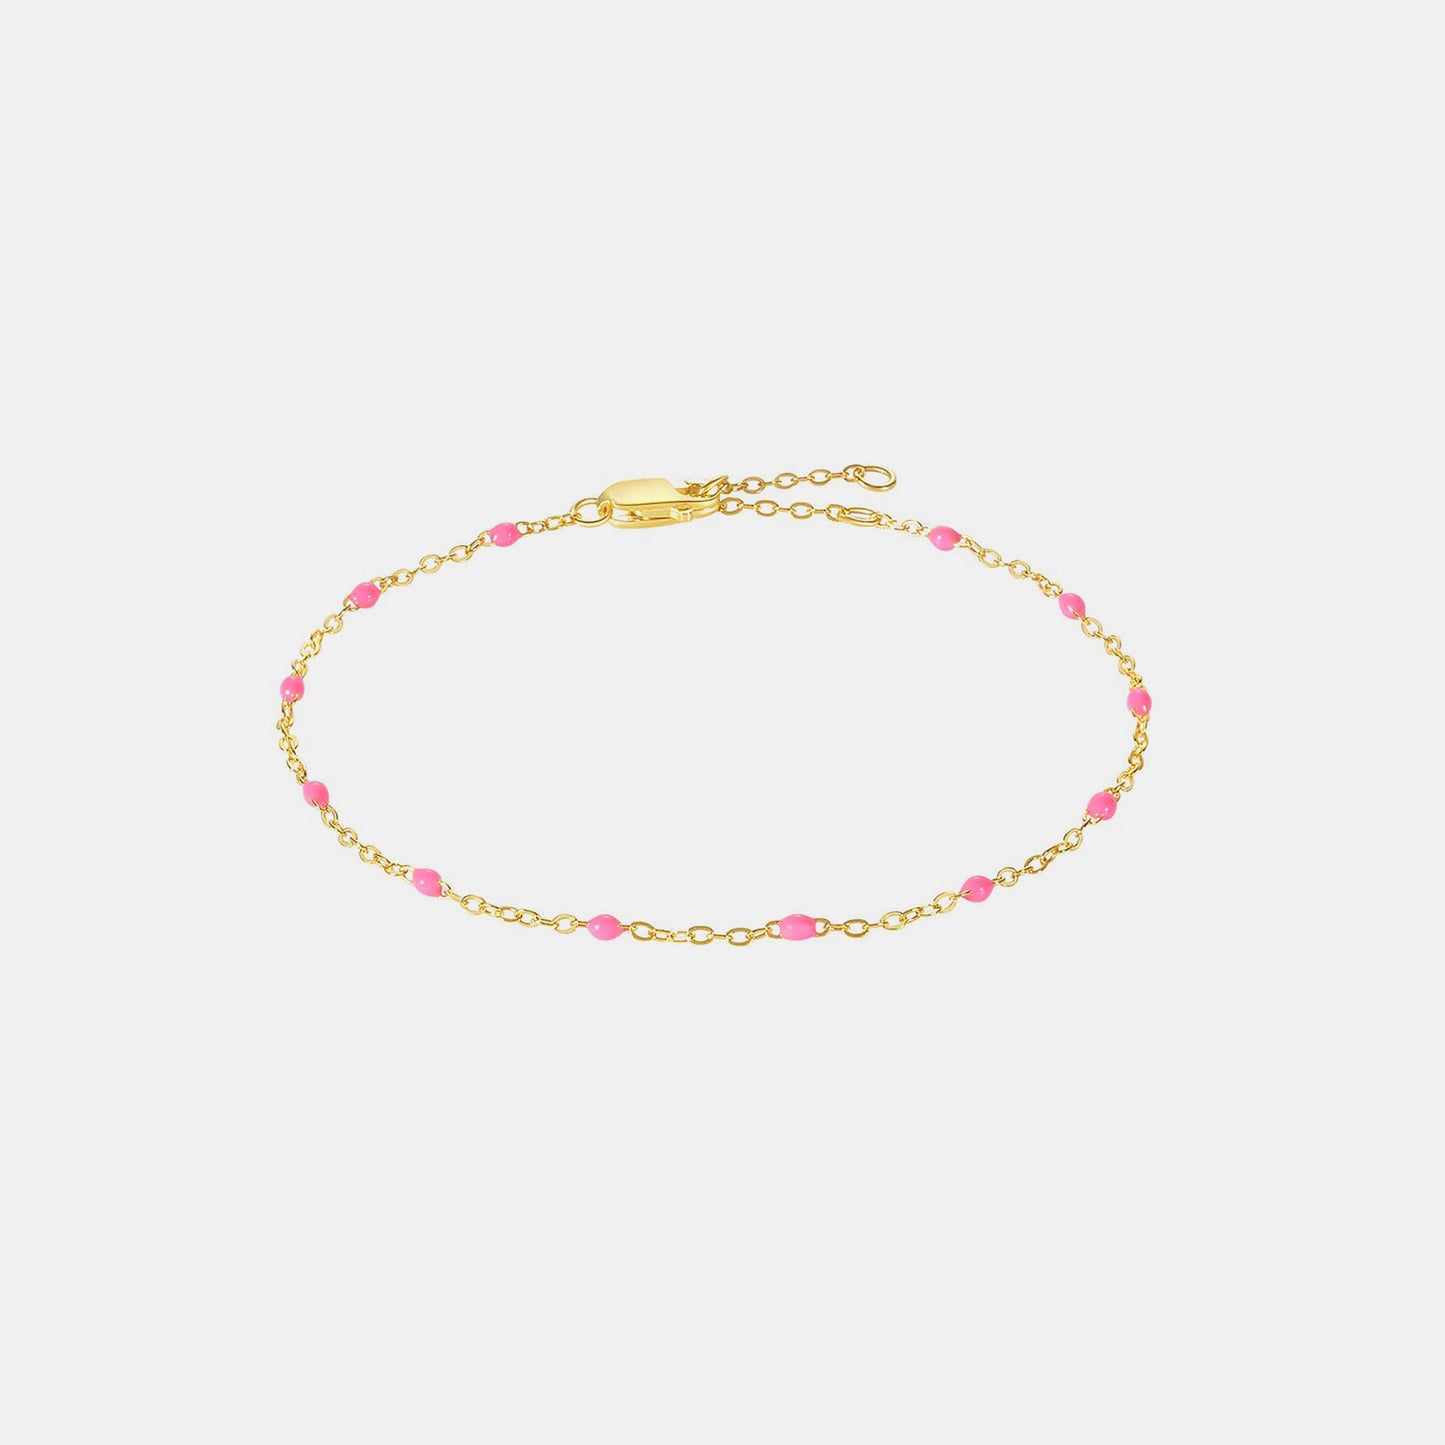 Bead 925 Sterling Silver Bracelet Gold Pink One Size